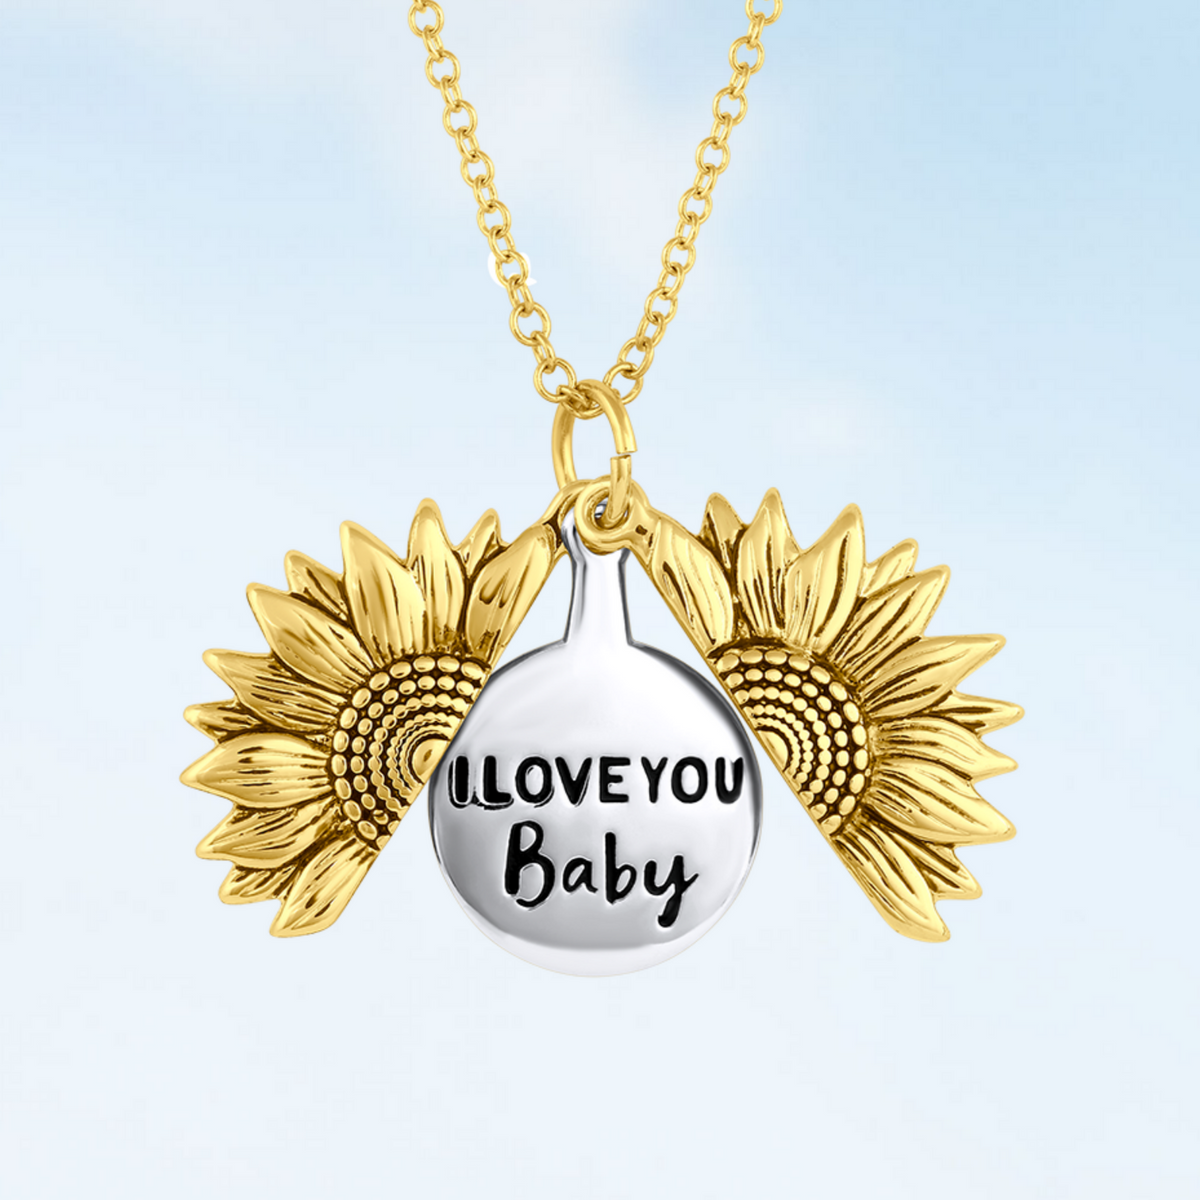 Bee Kind Shop - I love You Baby Necklace